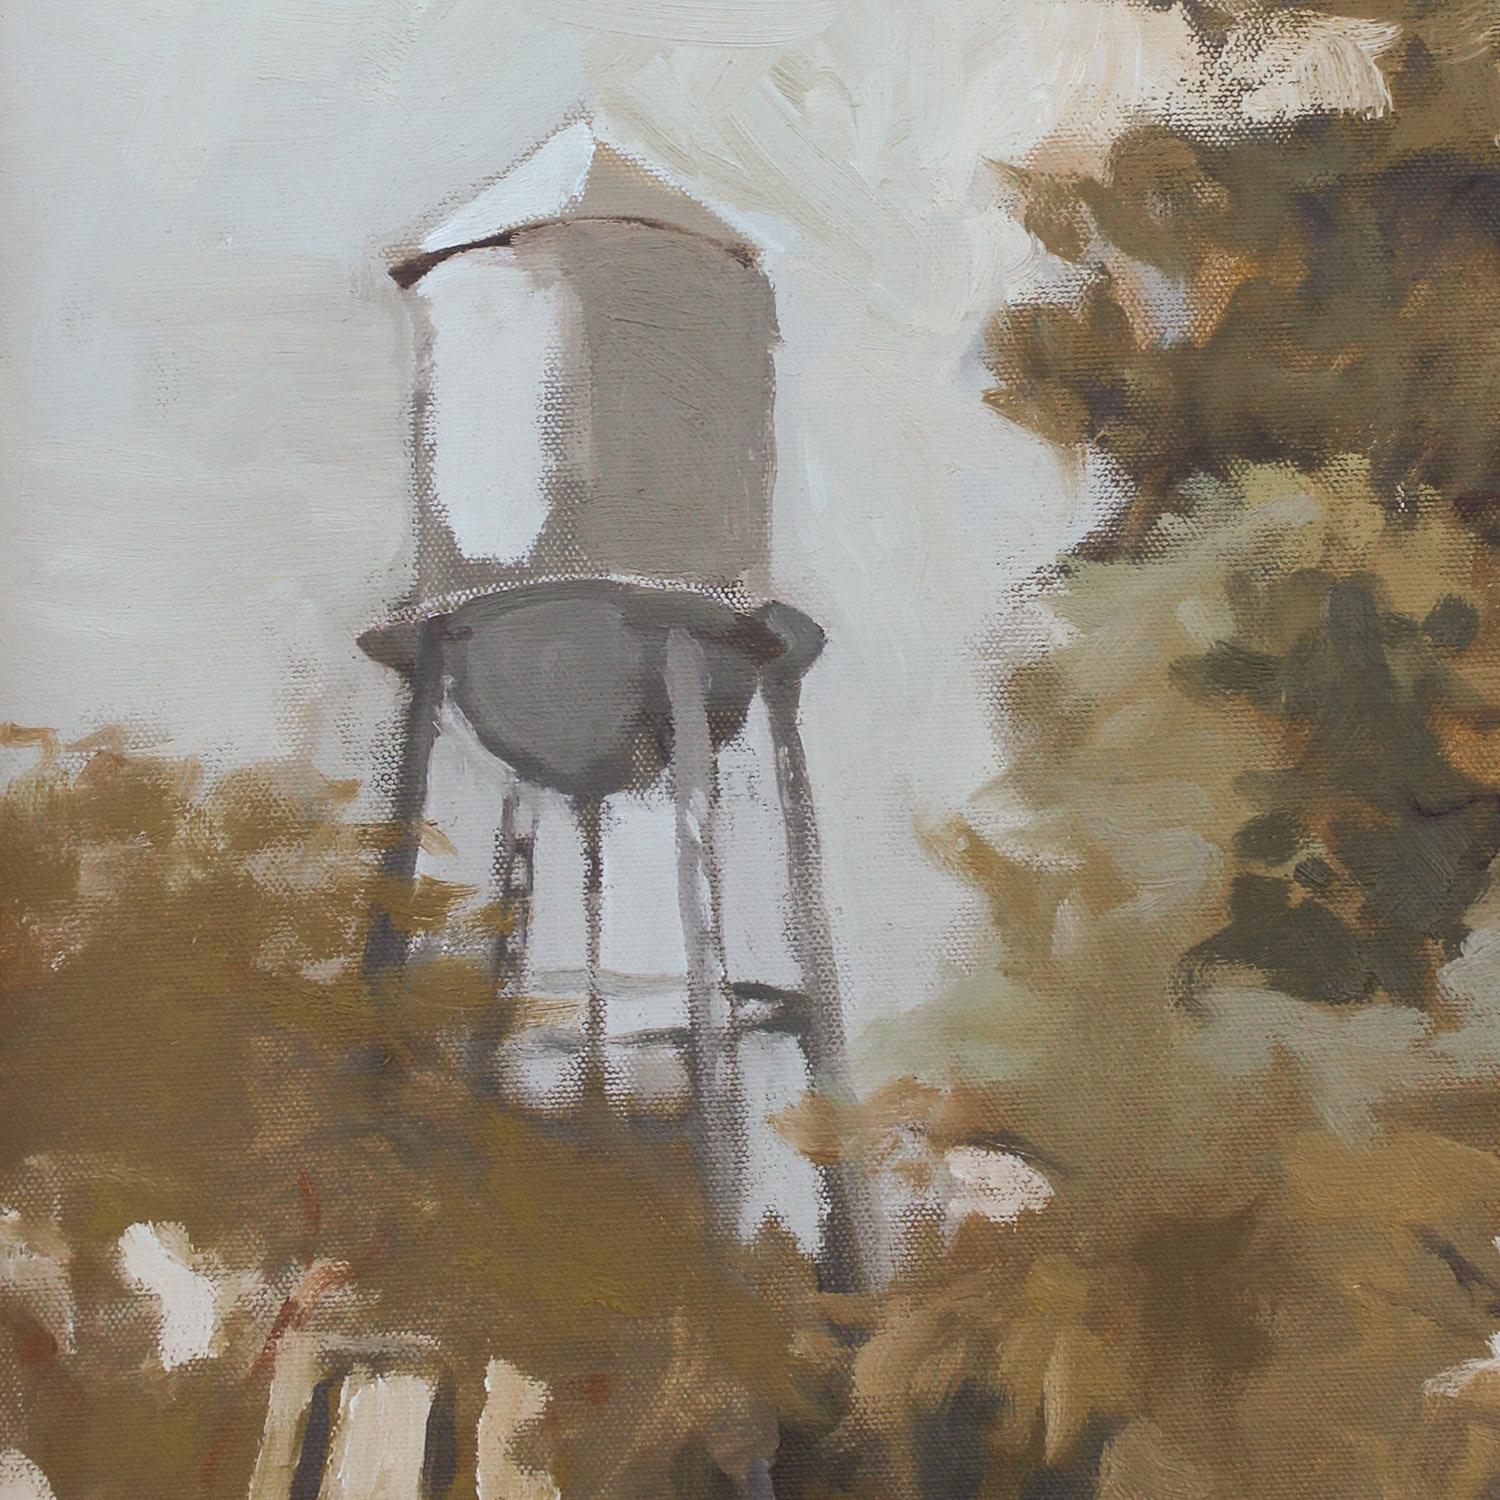 'Inglewood 6-4-2020' - plein air landscape - architectural painting  - Painting by Kathryn Keller